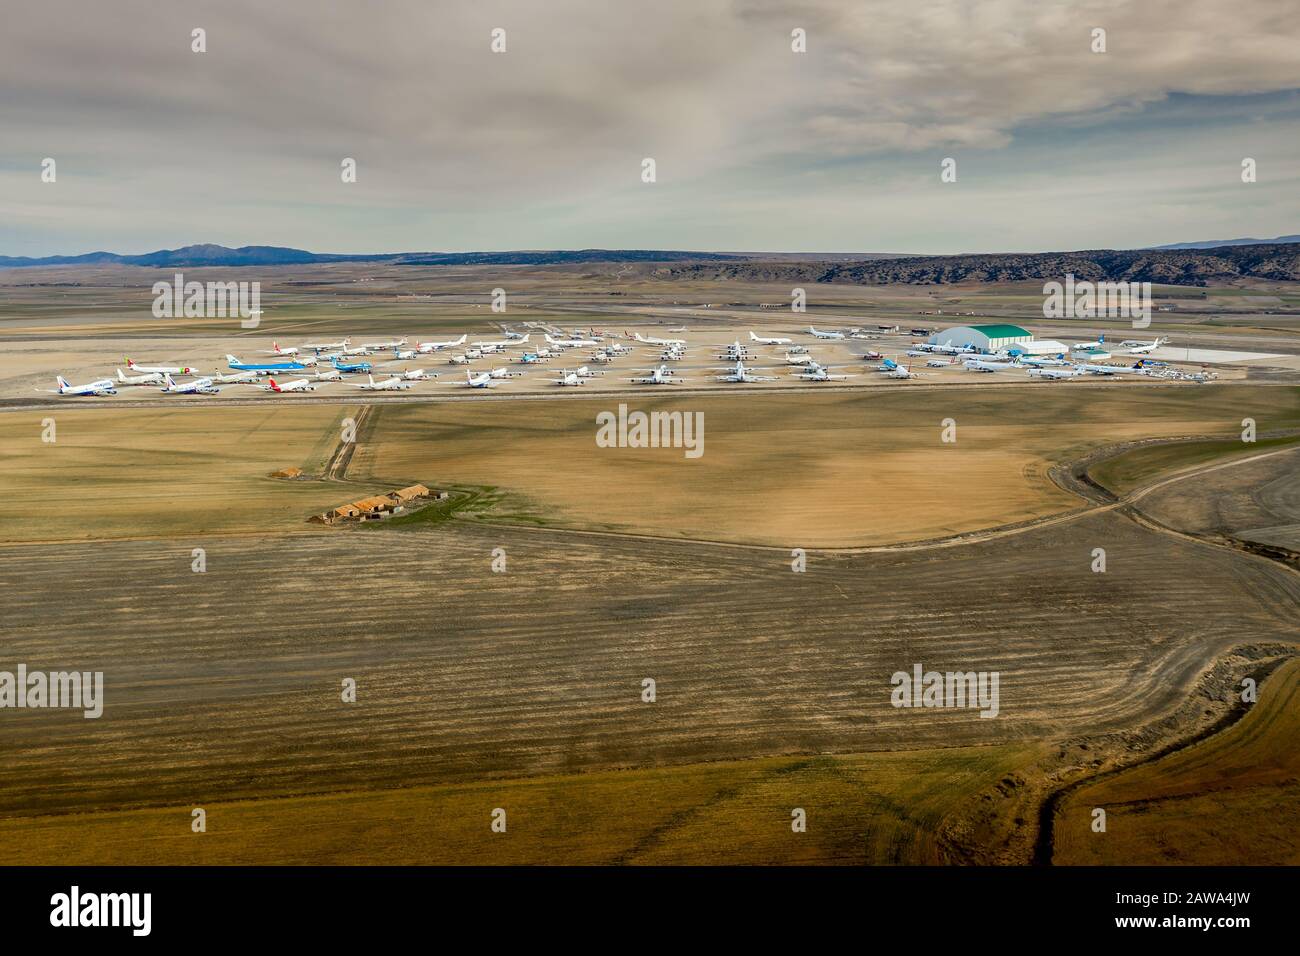 View of Teruel noncommercial airport where airplanes are stored and parked for refurbishment or maintenance in Spain Stock Photo